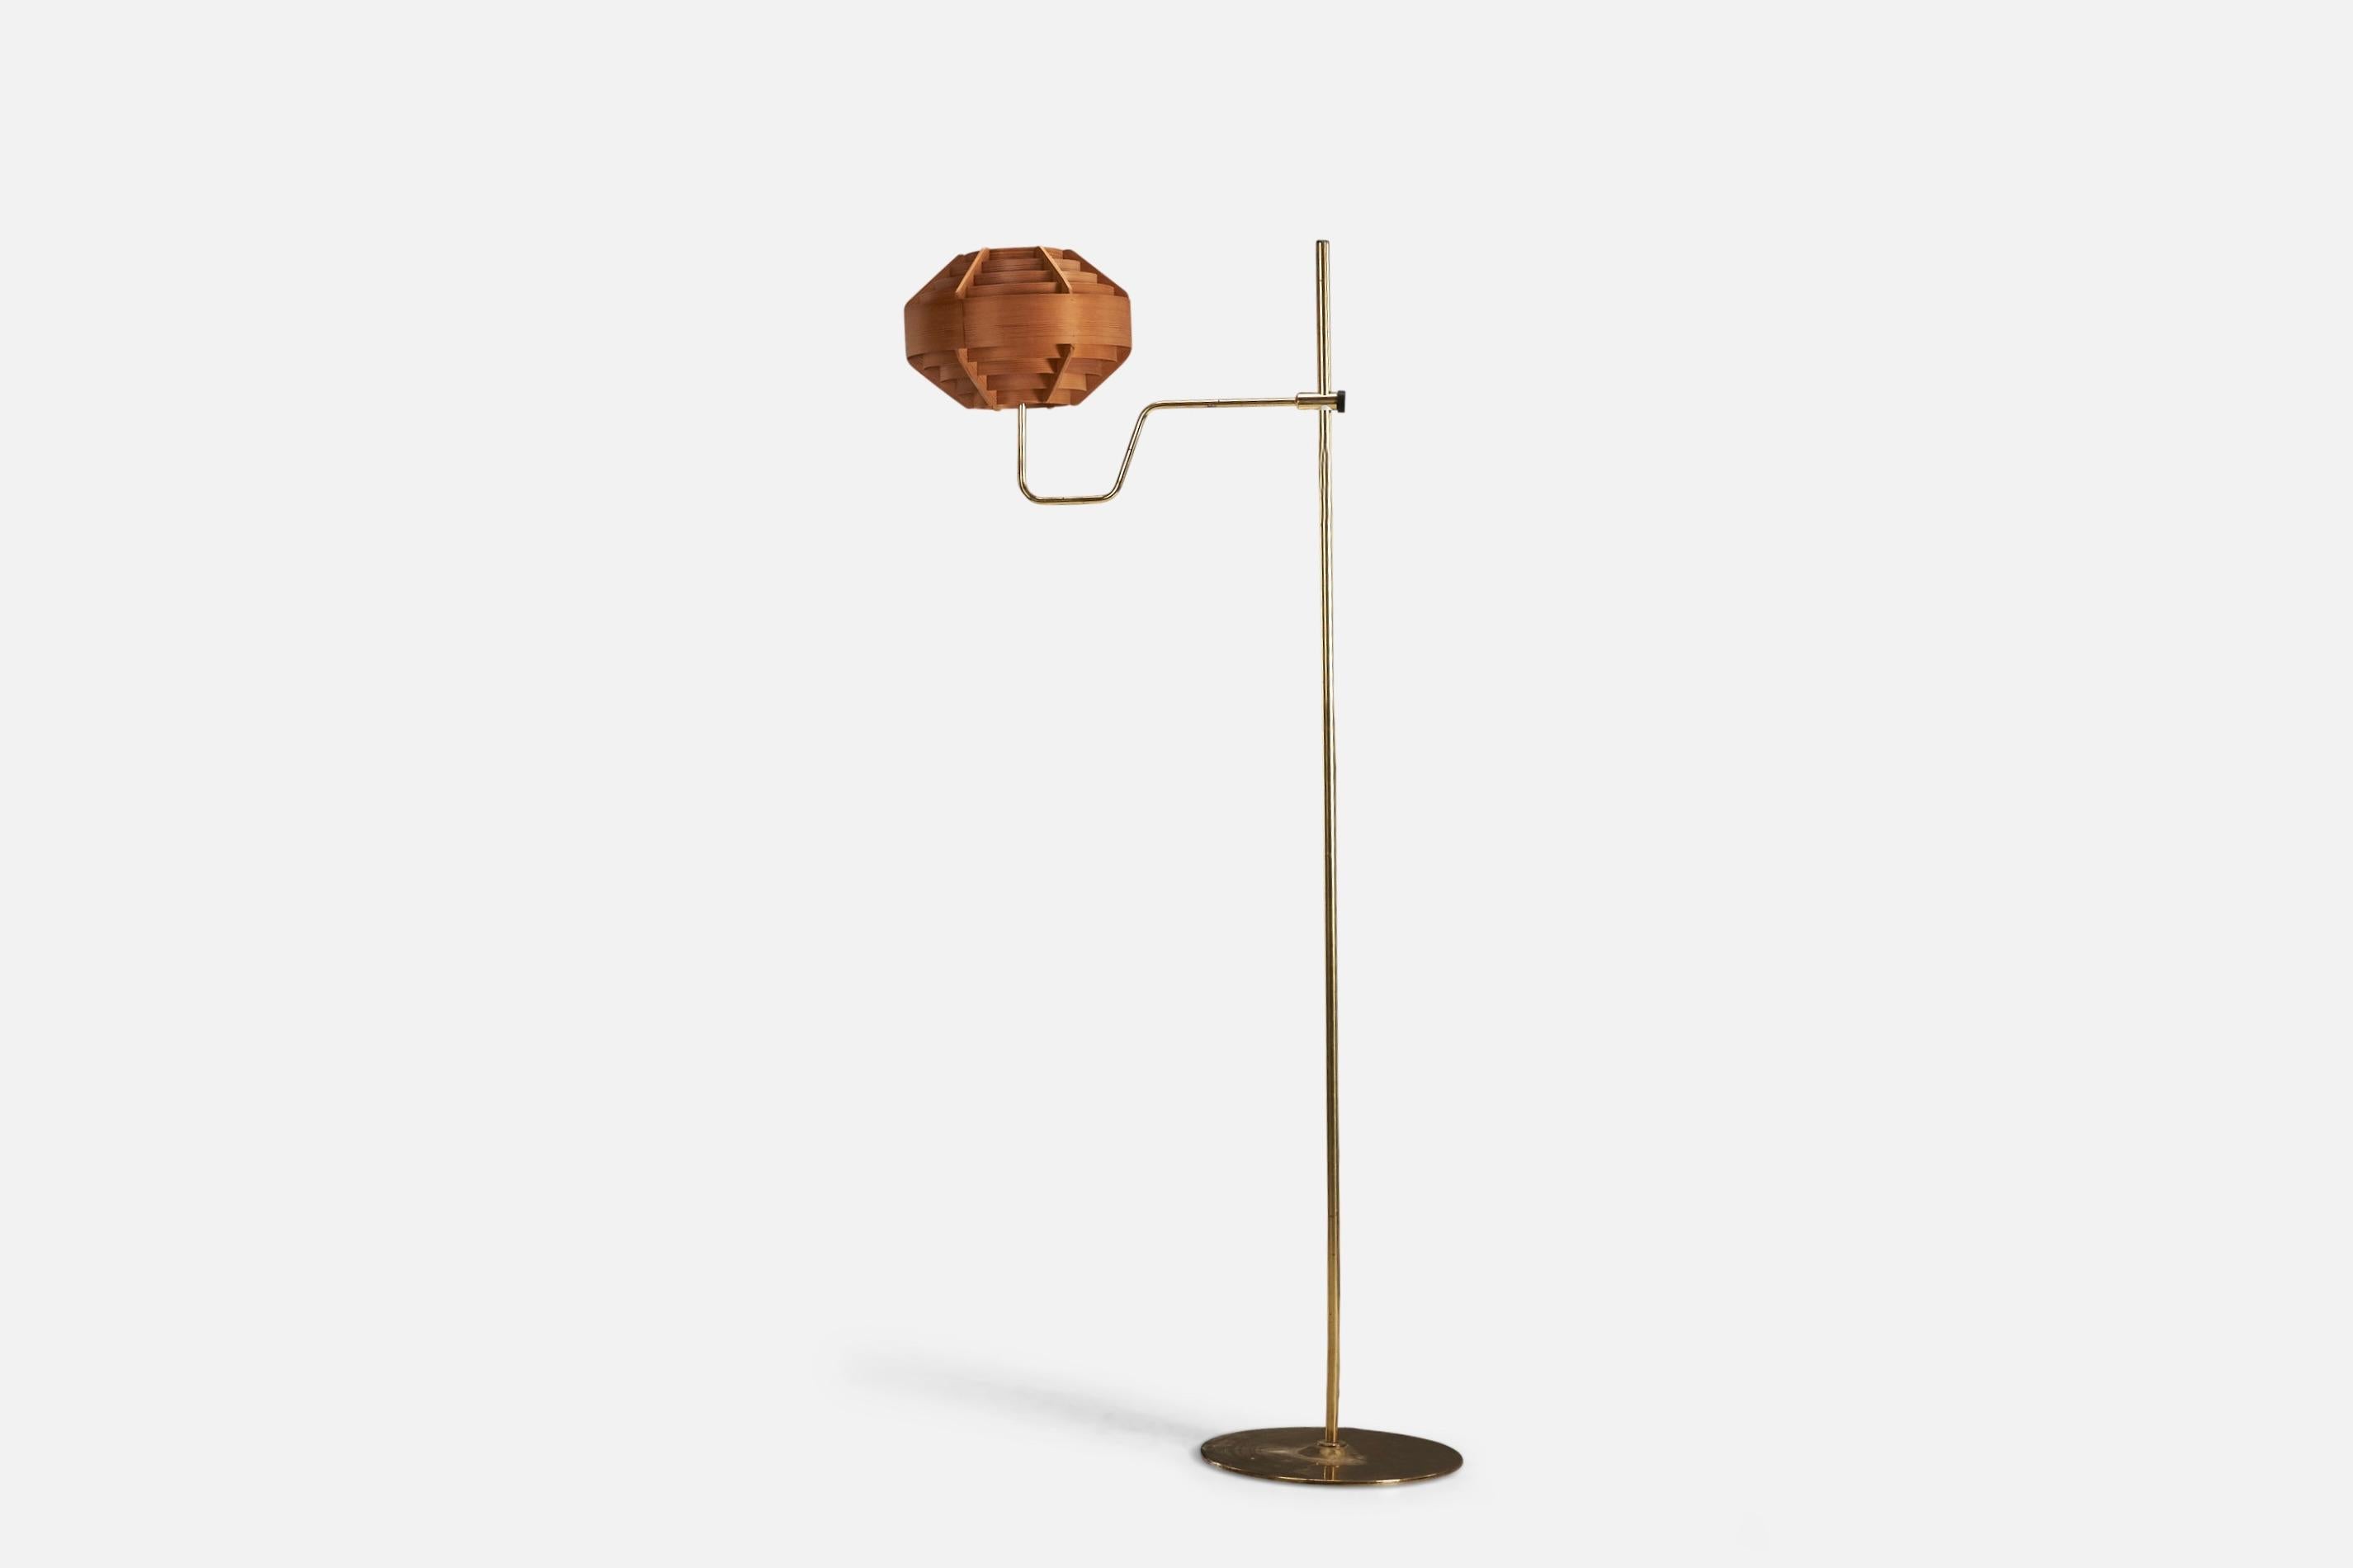 A brass and moulded wood veneer floor lamp designed and produced by Hans-Agne Jakobsson, Sweden, 1970s.

Lampshade assorted to base.

Socket takes standard E-26 medium base bulb.

There is no maximum wattage stated on the fixture.